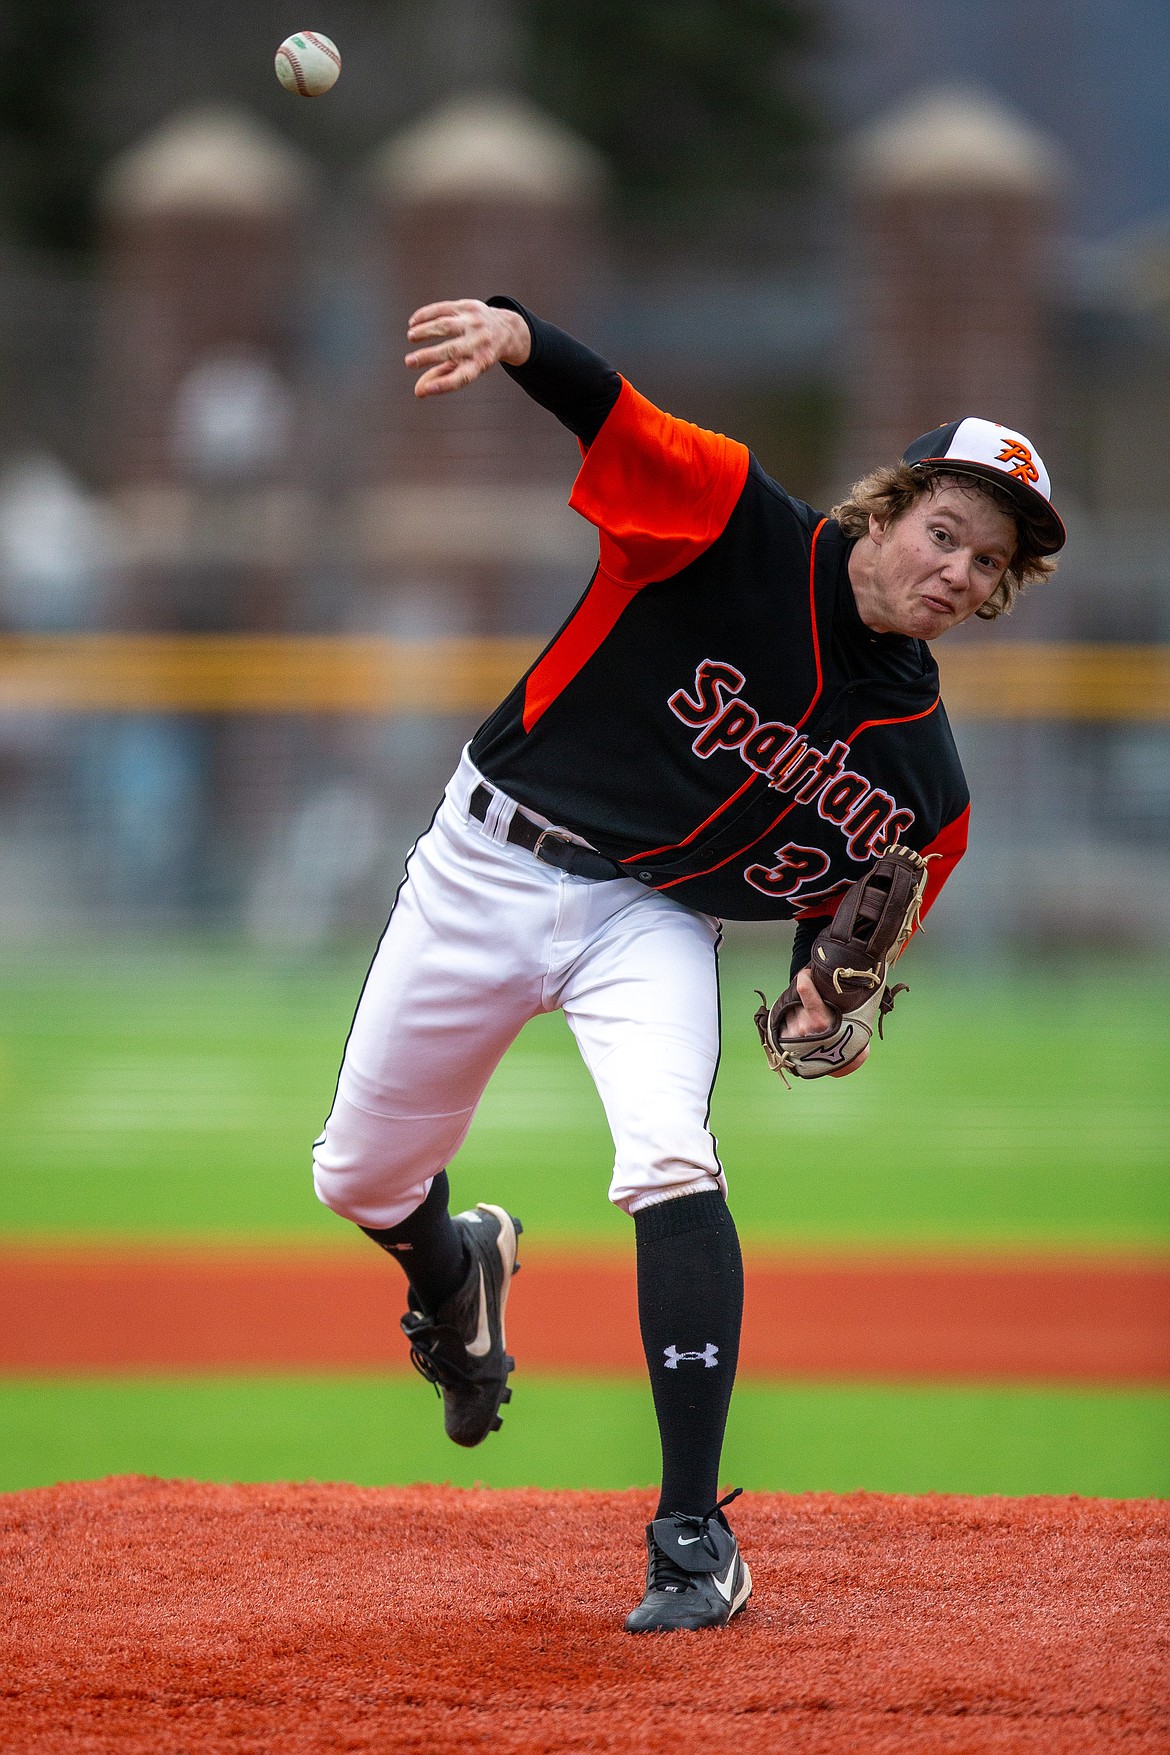 Tyson Brooks pitches during a game against Sandpoint on April 1.